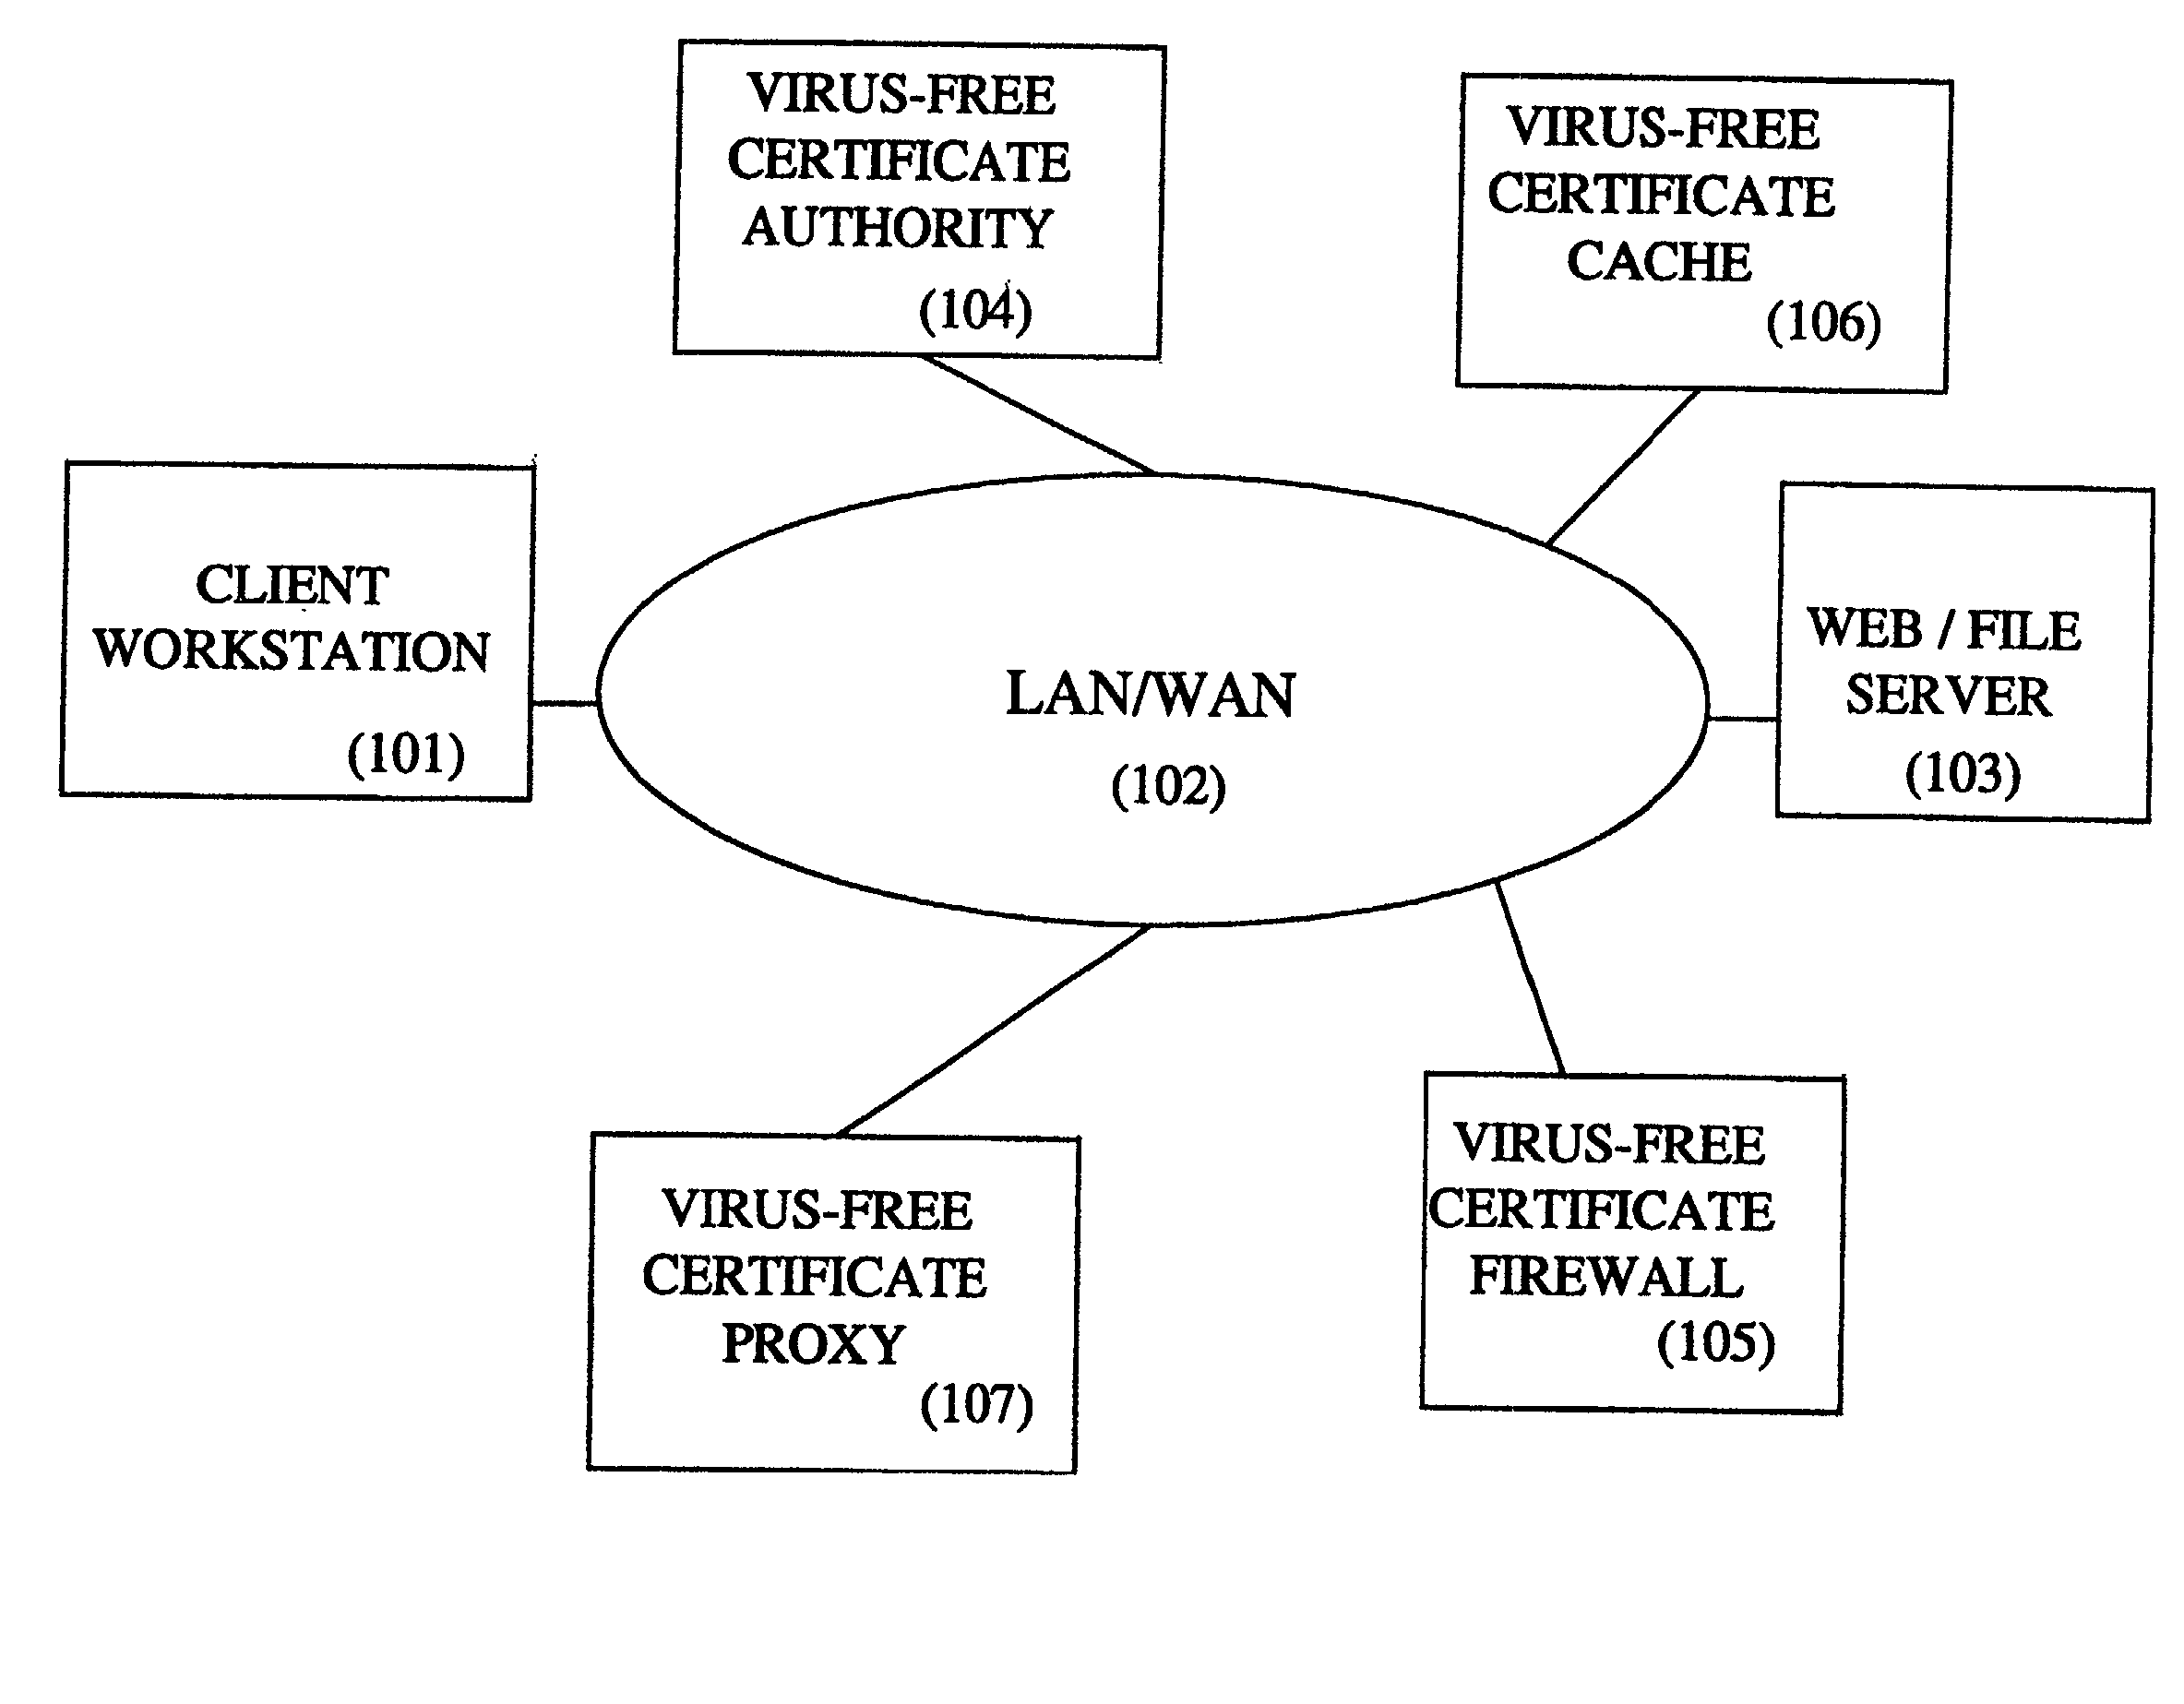 Method and system for controlling and filtering files using a virus-free certificate